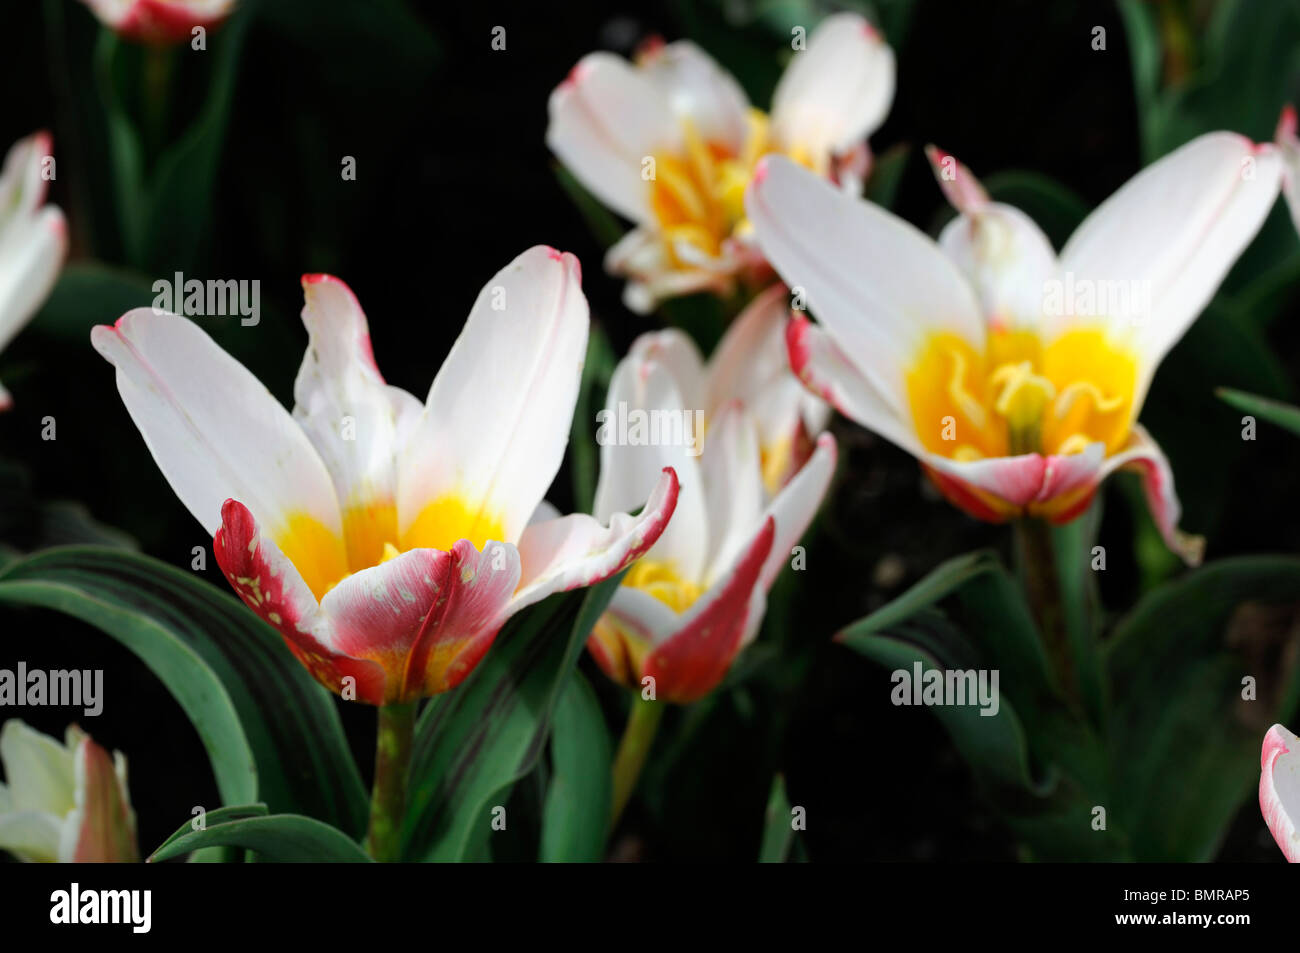 tulipa tulip hearts delight kaufmannia group 5 flowers spring bunch group cluster tri color flower large red and white flowers Stock Photo